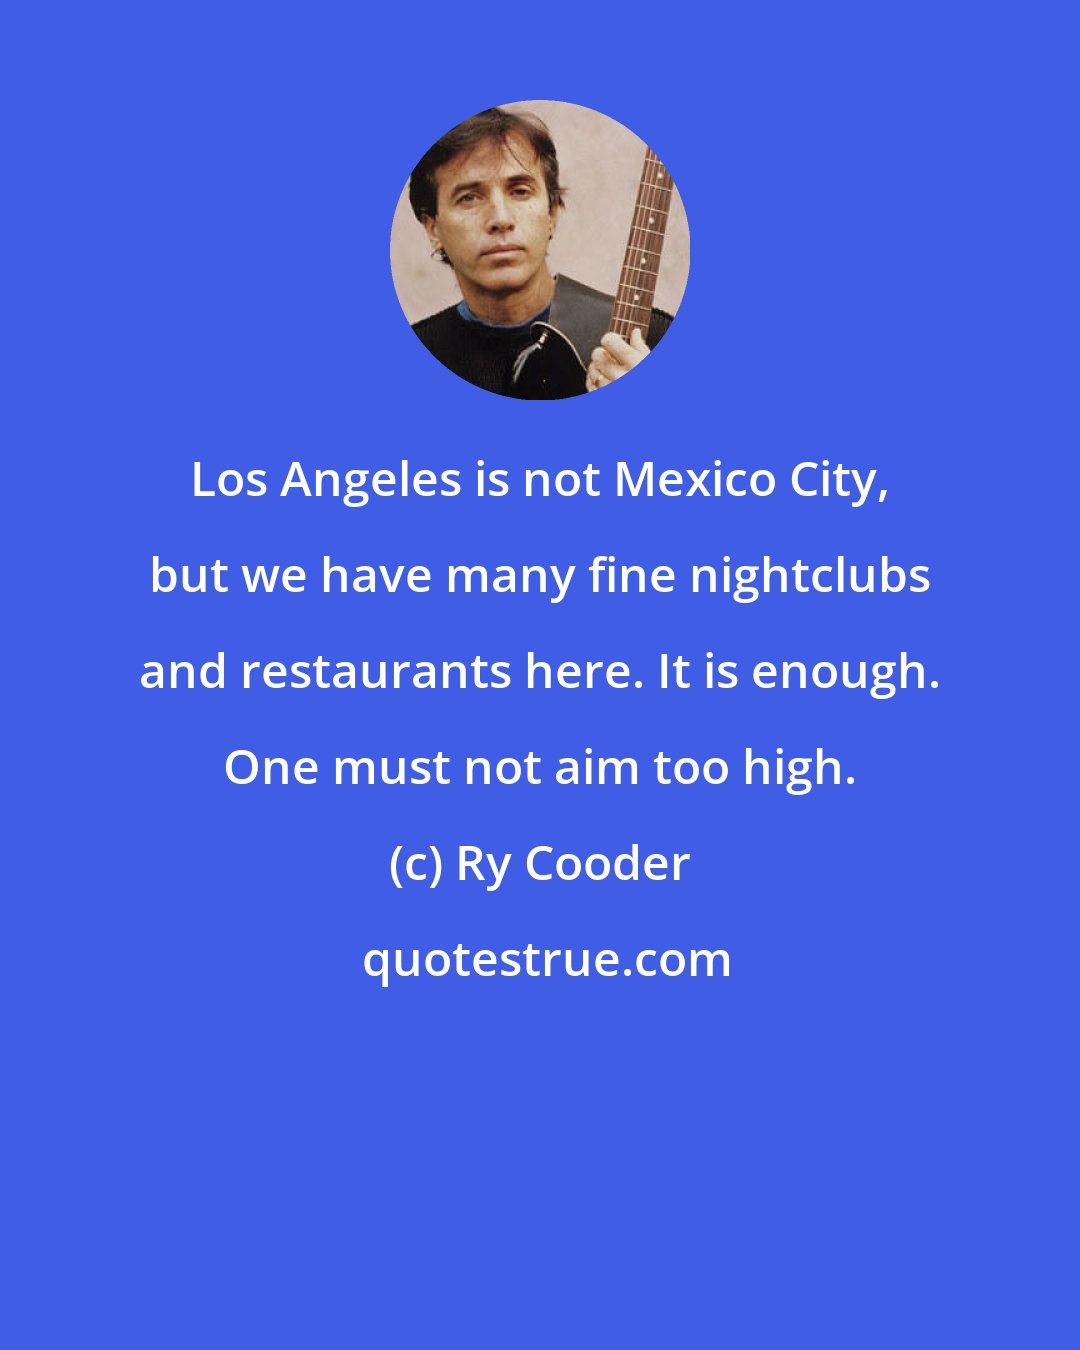 Ry Cooder: Los Angeles is not Mexico City, but we have many fine nightclubs and restaurants here. It is enough. One must not aim too high.